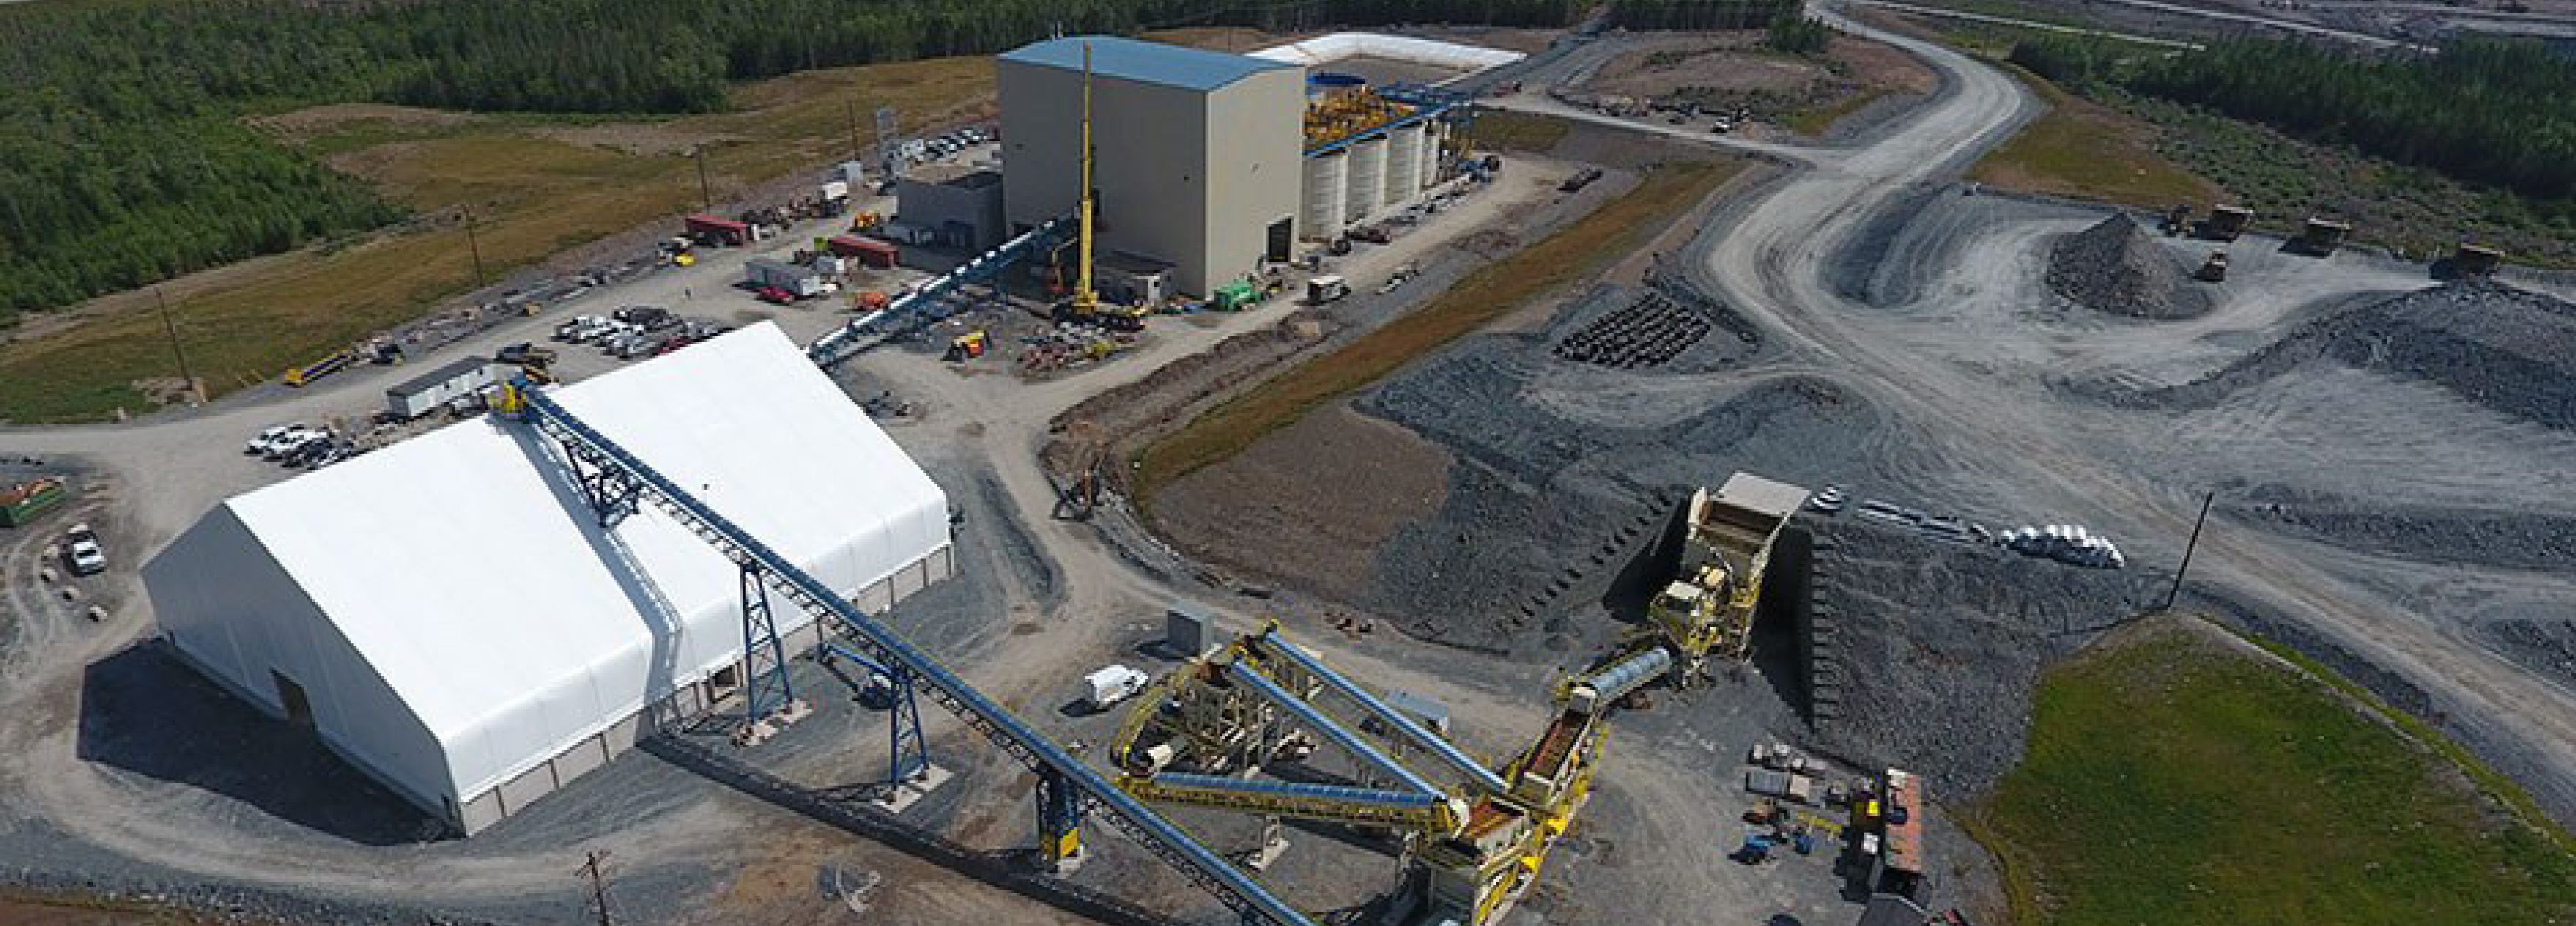 Image: Moose River: Performance-based contract enables project financing and drives superior shareholder value